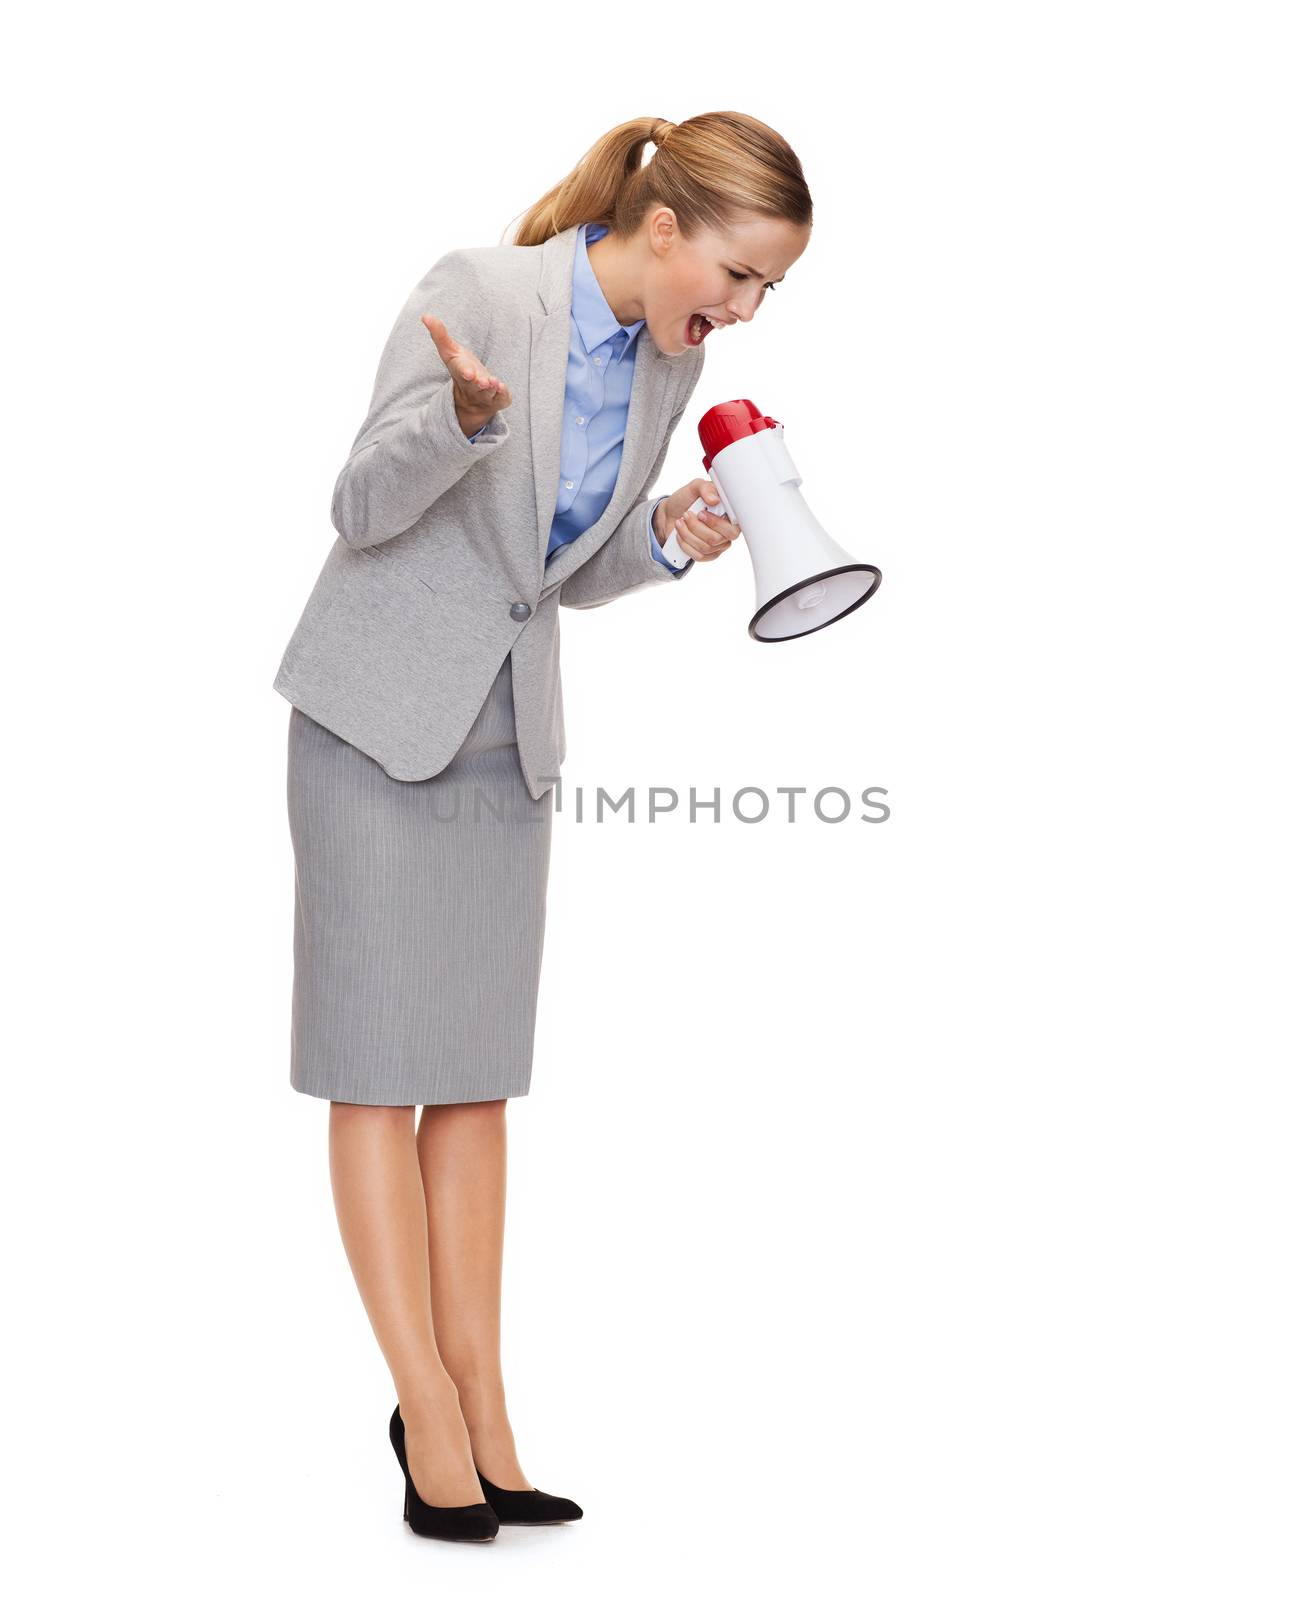 business, communication and office concept - angry businesswoman with megaphone screaming at someone imaginary